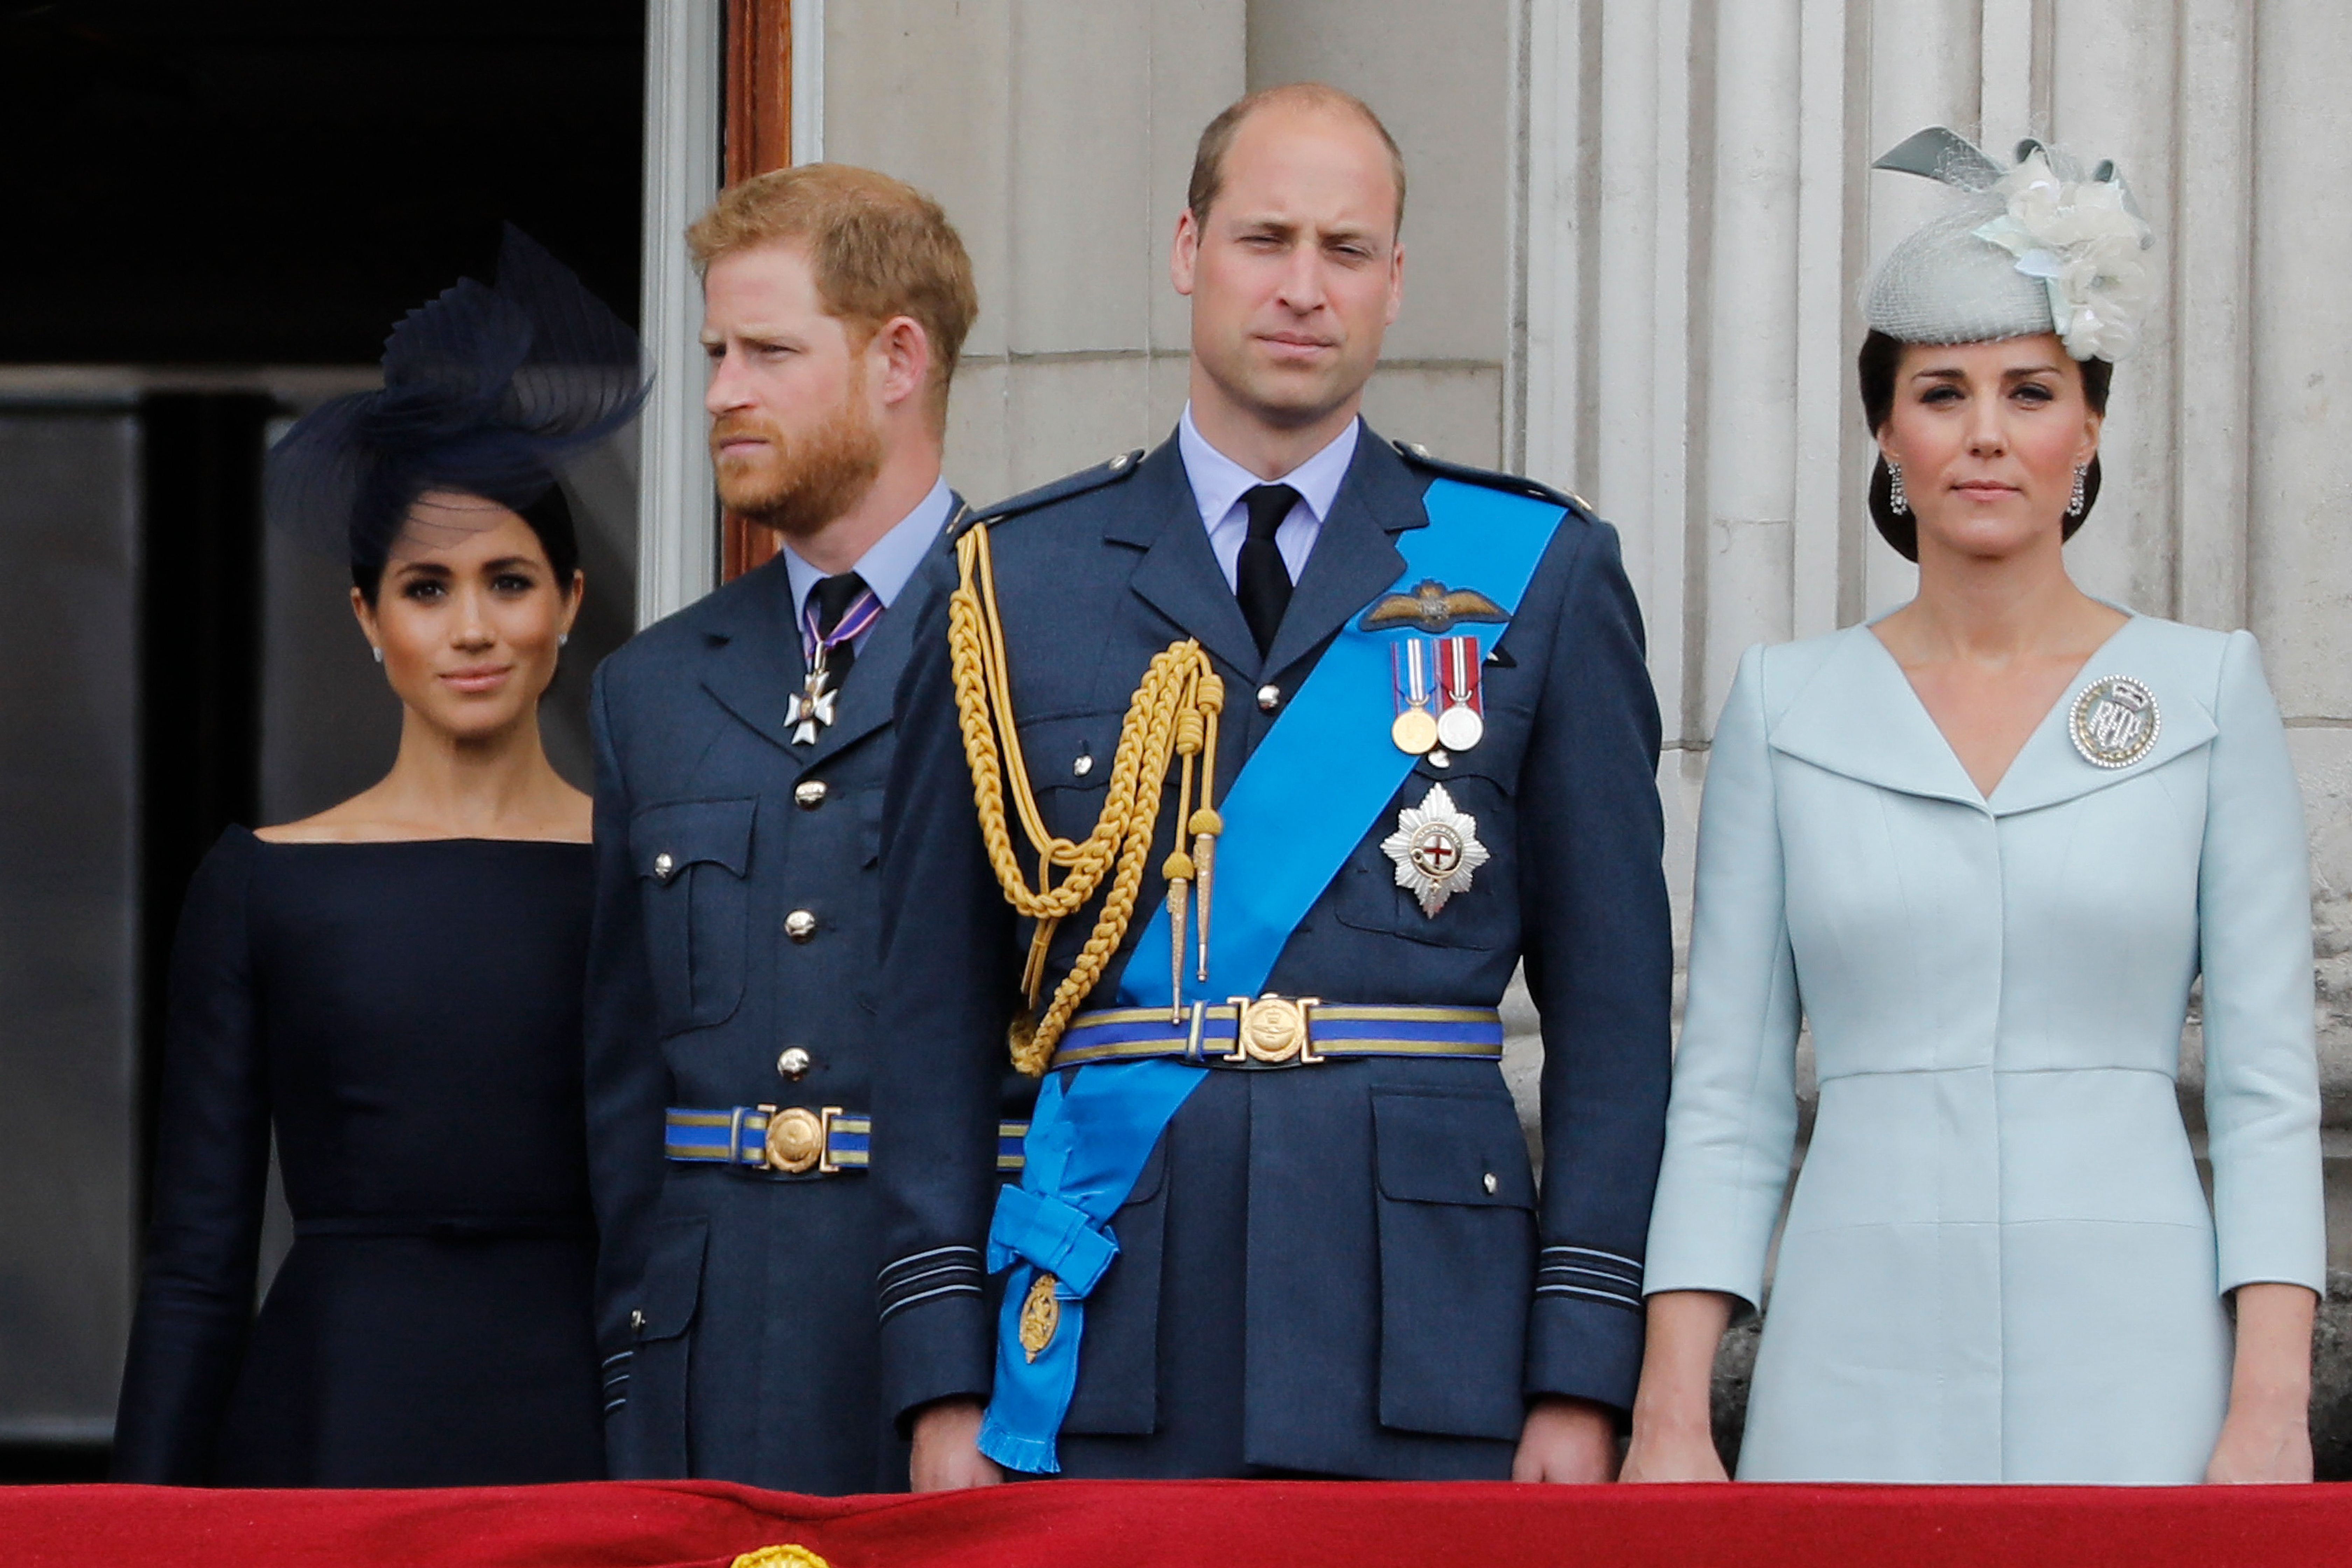 Meghan Markle, Prince Harry, Prince William and Kate Middleton during the centenary of the Royal Air Force (RAF) in London, England on July 10, 2018 | Source: Getty Images